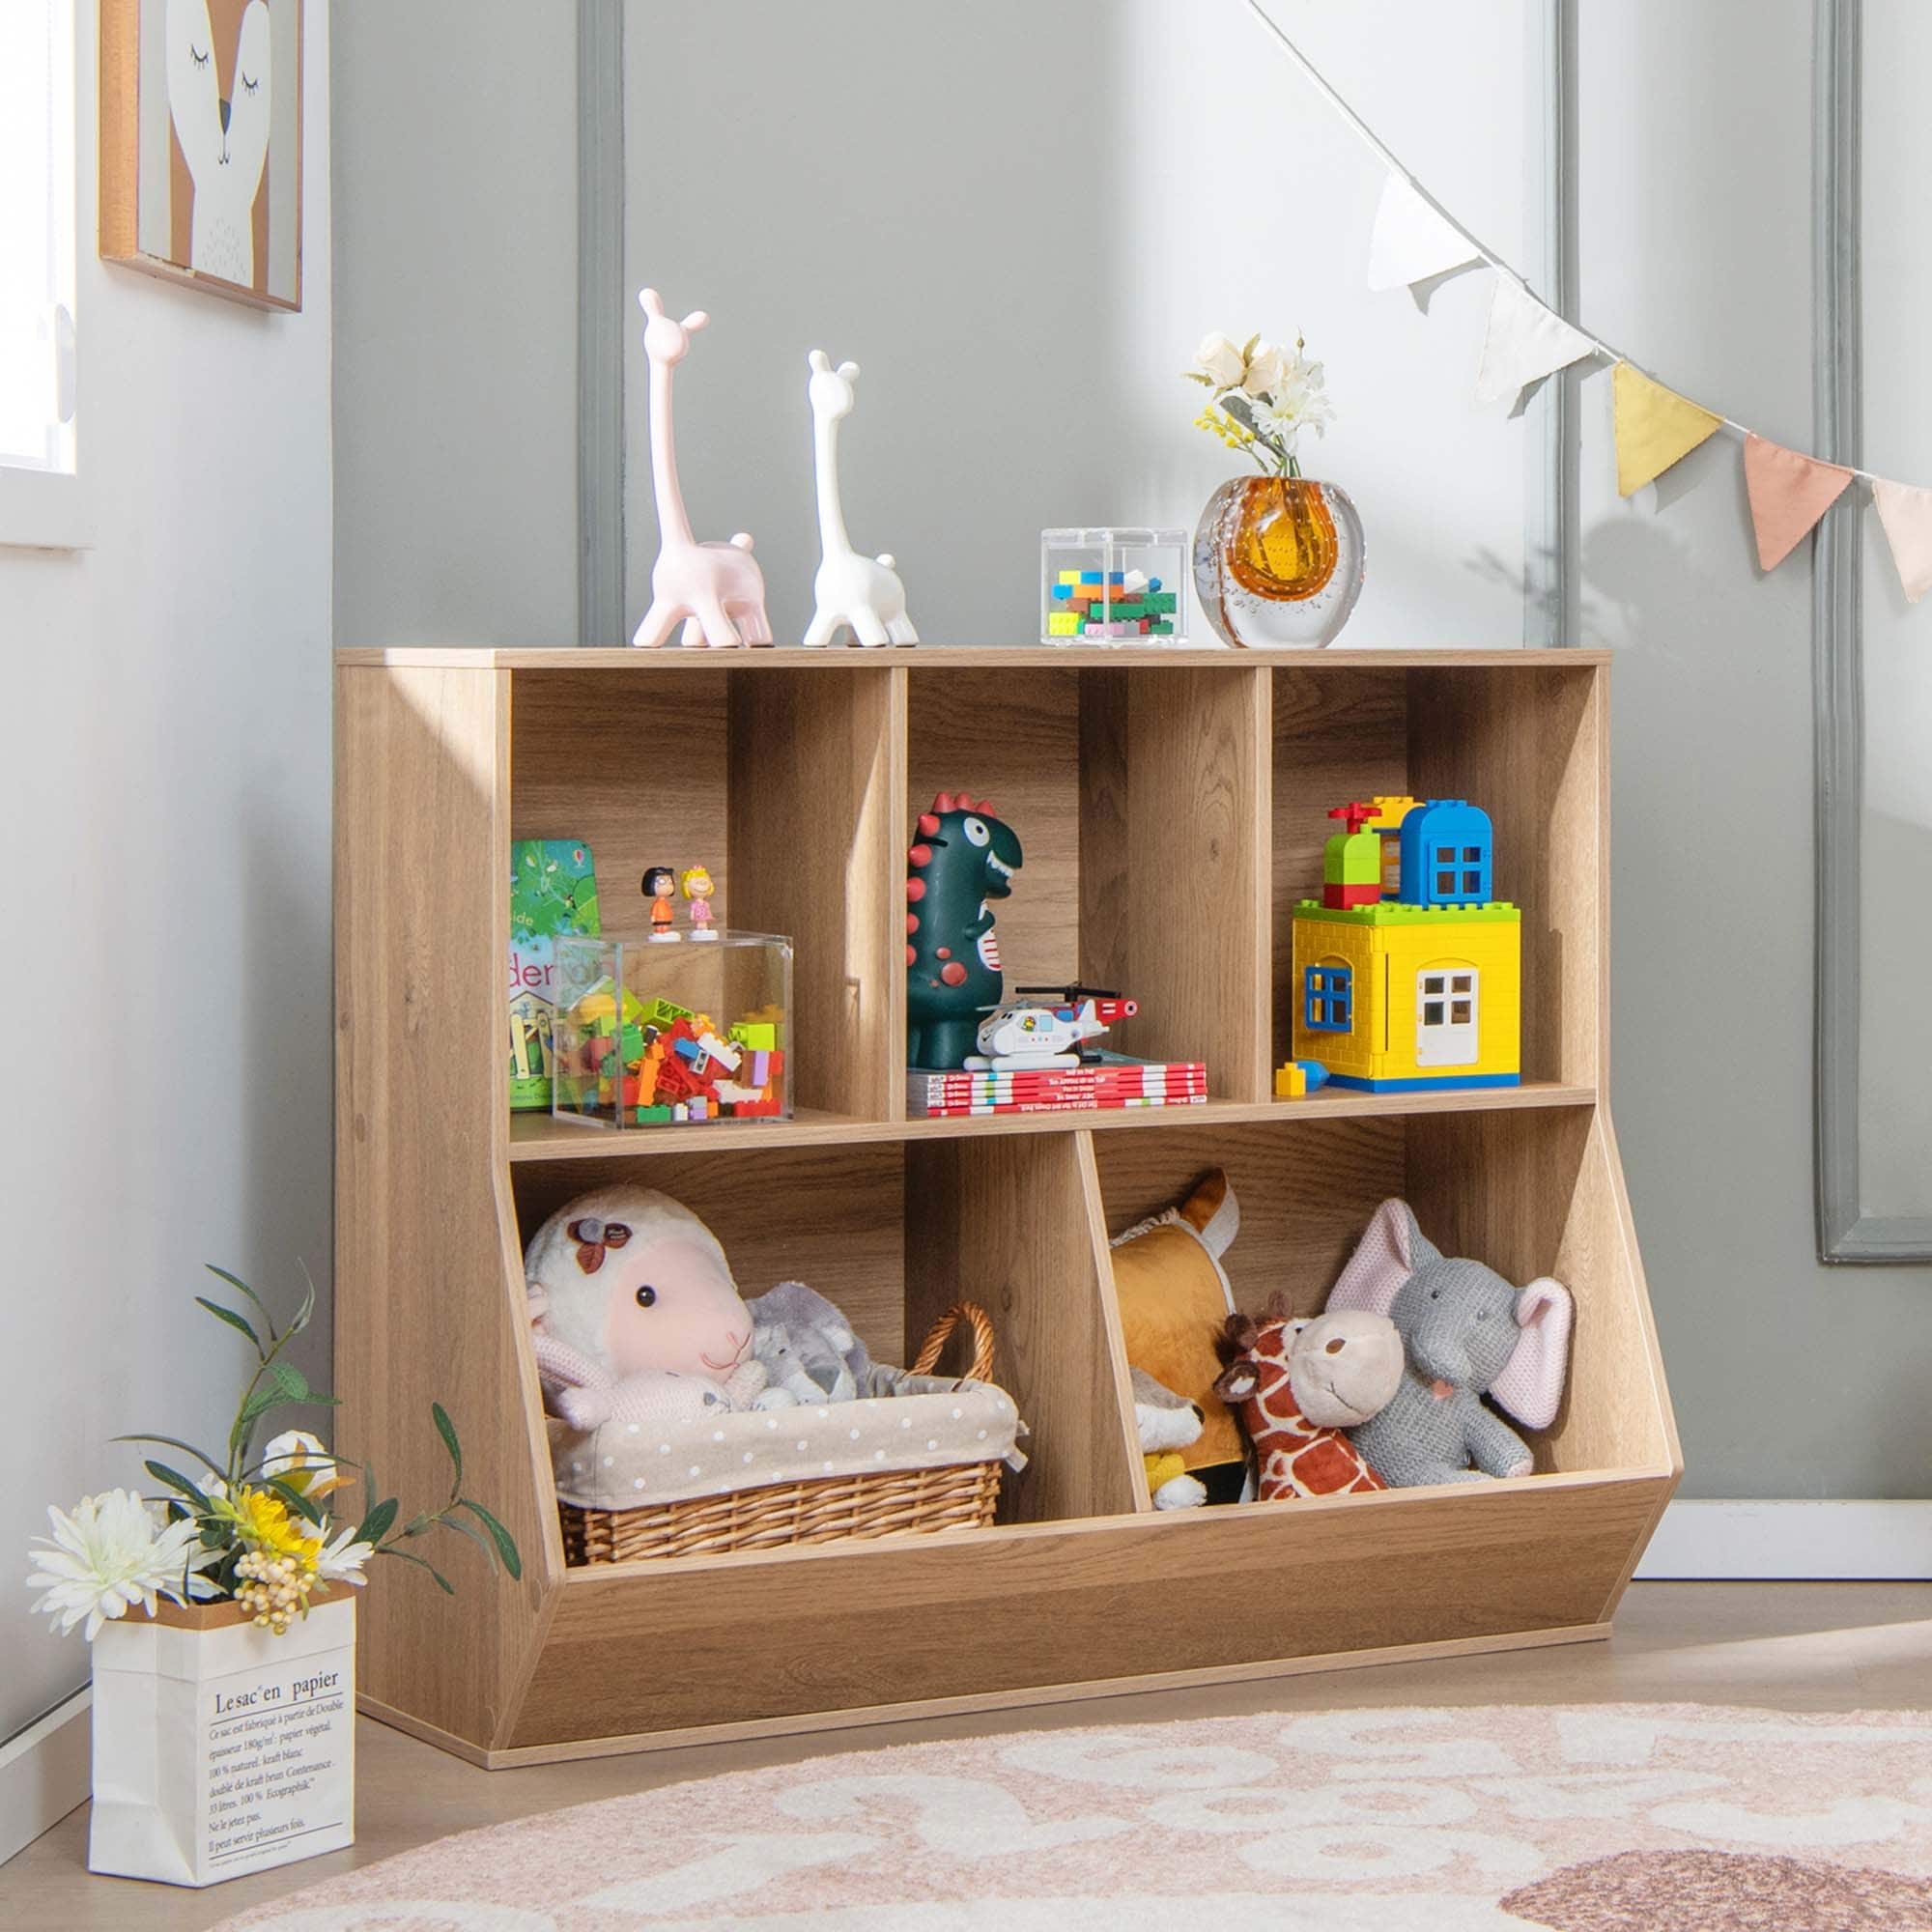 https://ak1.ostkcdn.com/images/products/is/images/direct/c377cd7596725bf25f1ce541498f9bb8fc4ded25/5-Cubby-Kids-Toy-Storage-Organizer-Wooden-Bookshelf-Natural-White.jpg